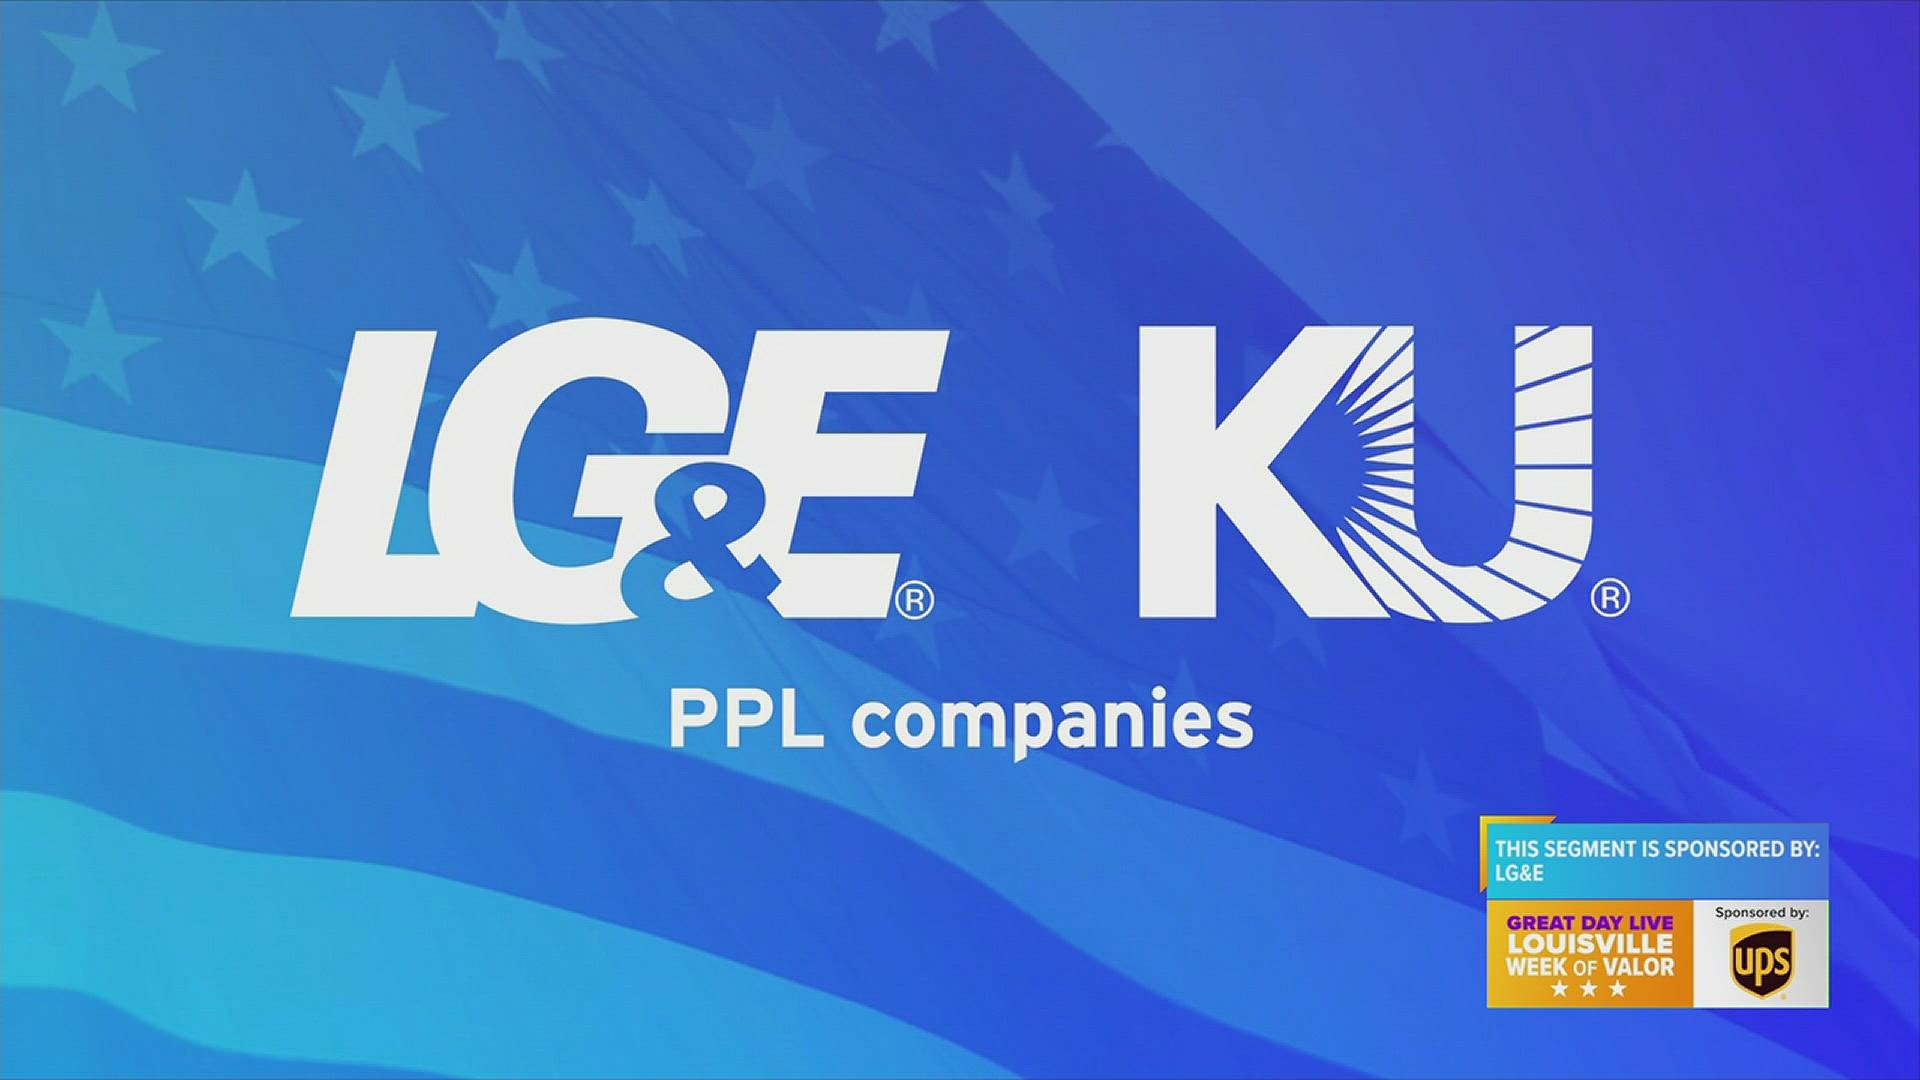 If you’re interested in learning more about careers at LG&E and KU, apply online at lge-ku.com/careers.